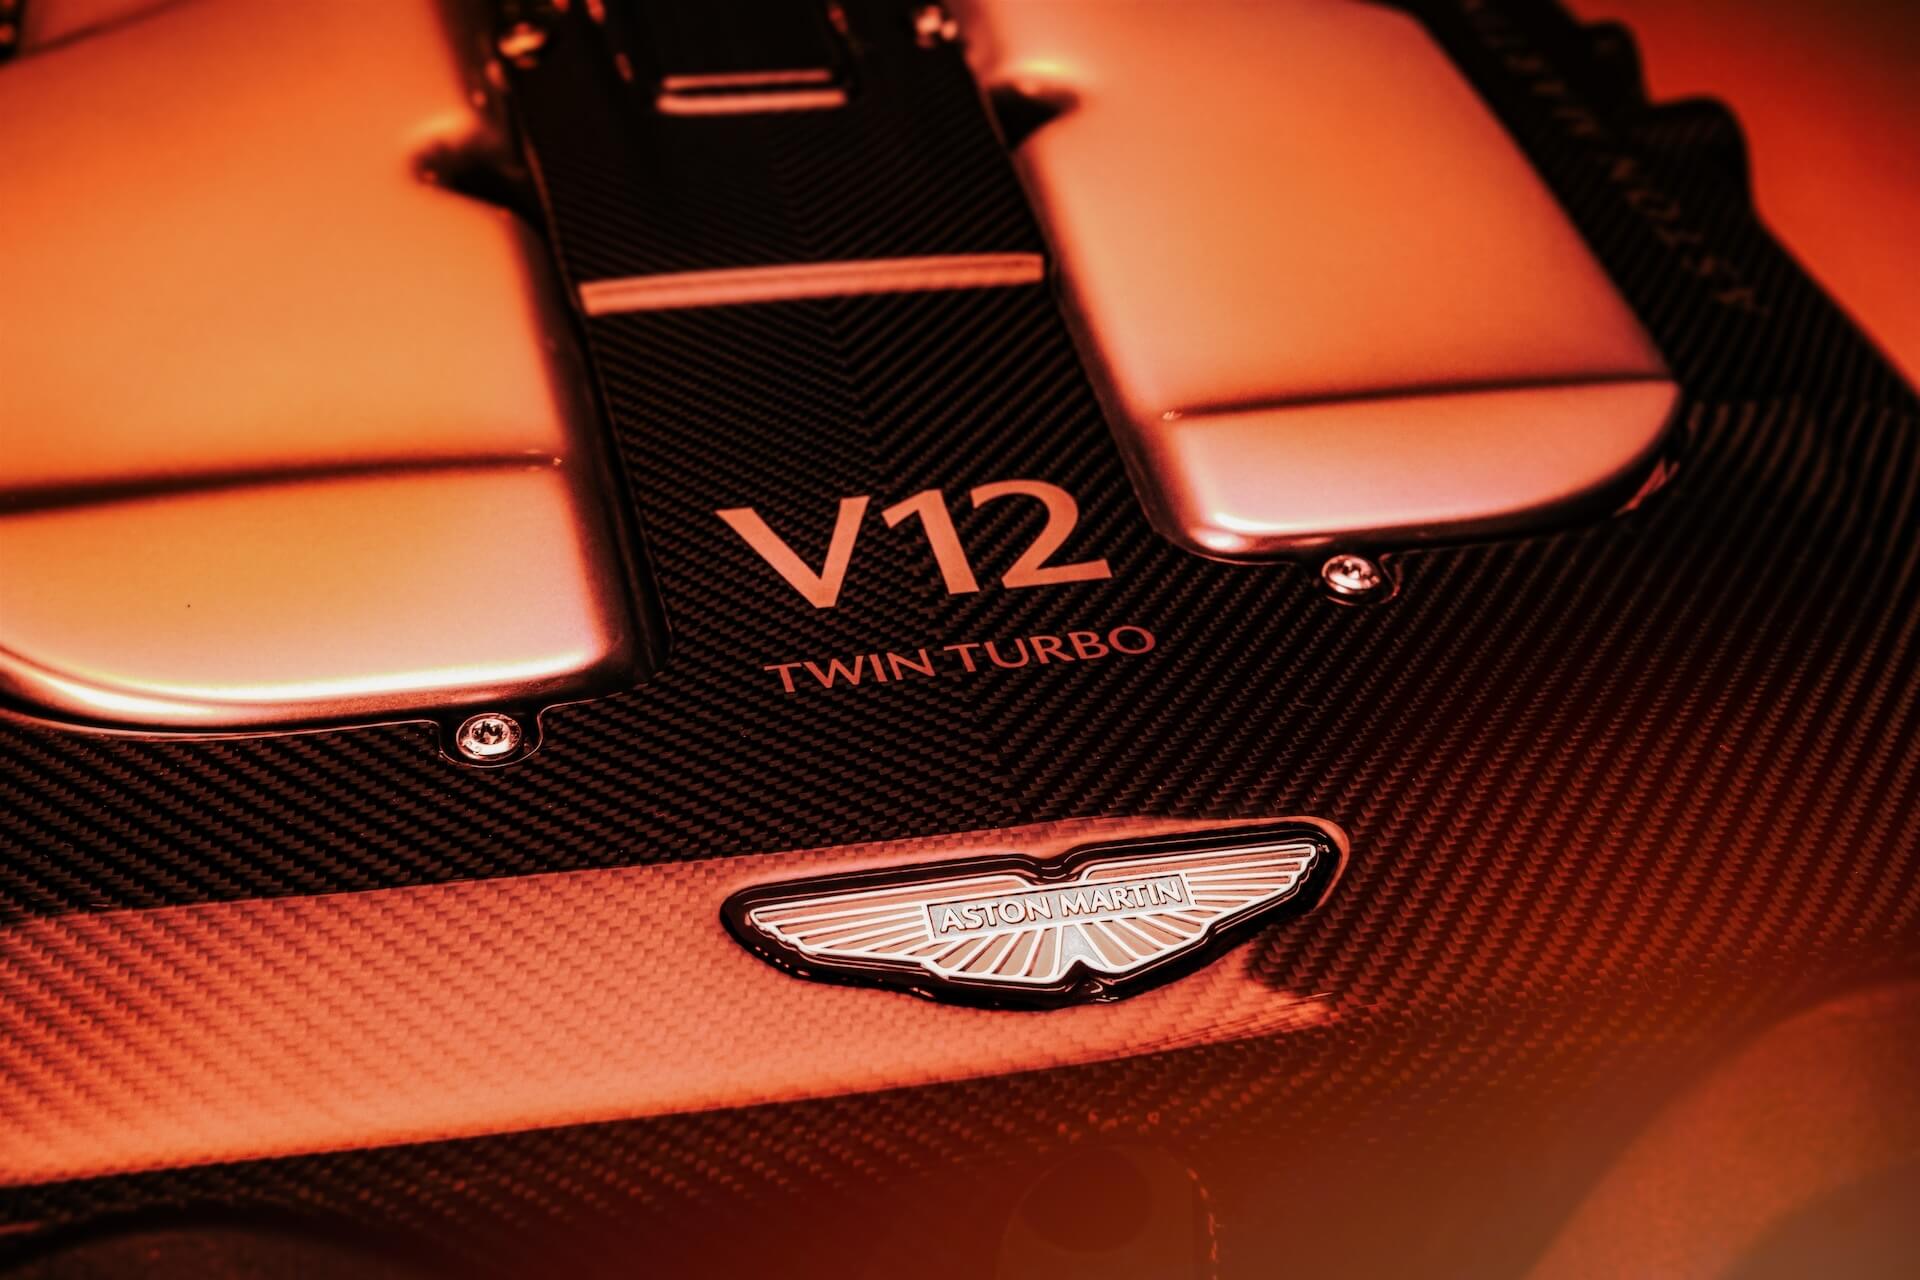 Aston Martin announced the appearance of a new V12 engine on the Vanquish supercar